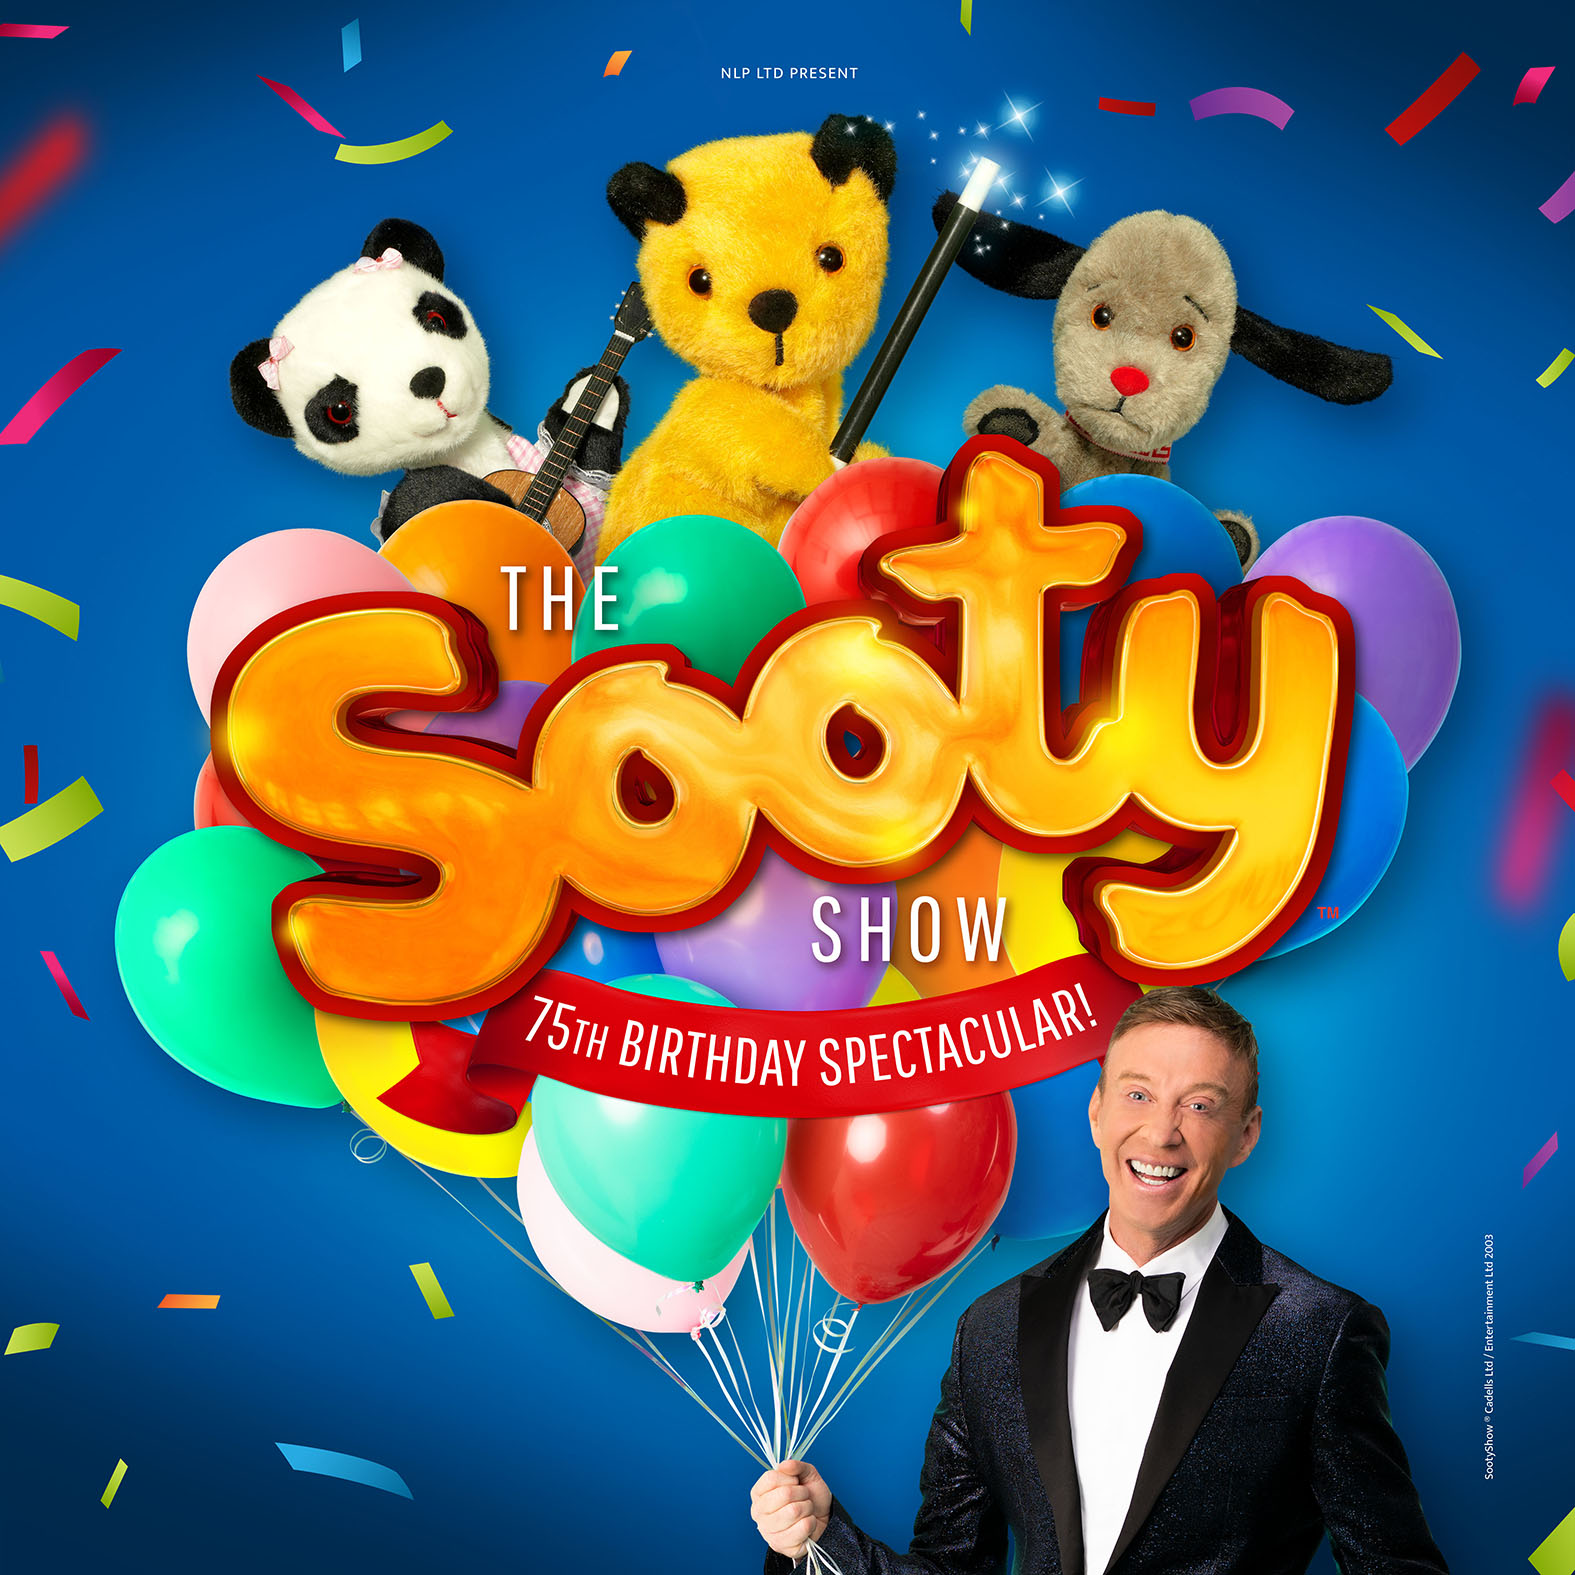 2023 - Sooty heads out on a brand new theatre tour to celebrate his 75th birthday